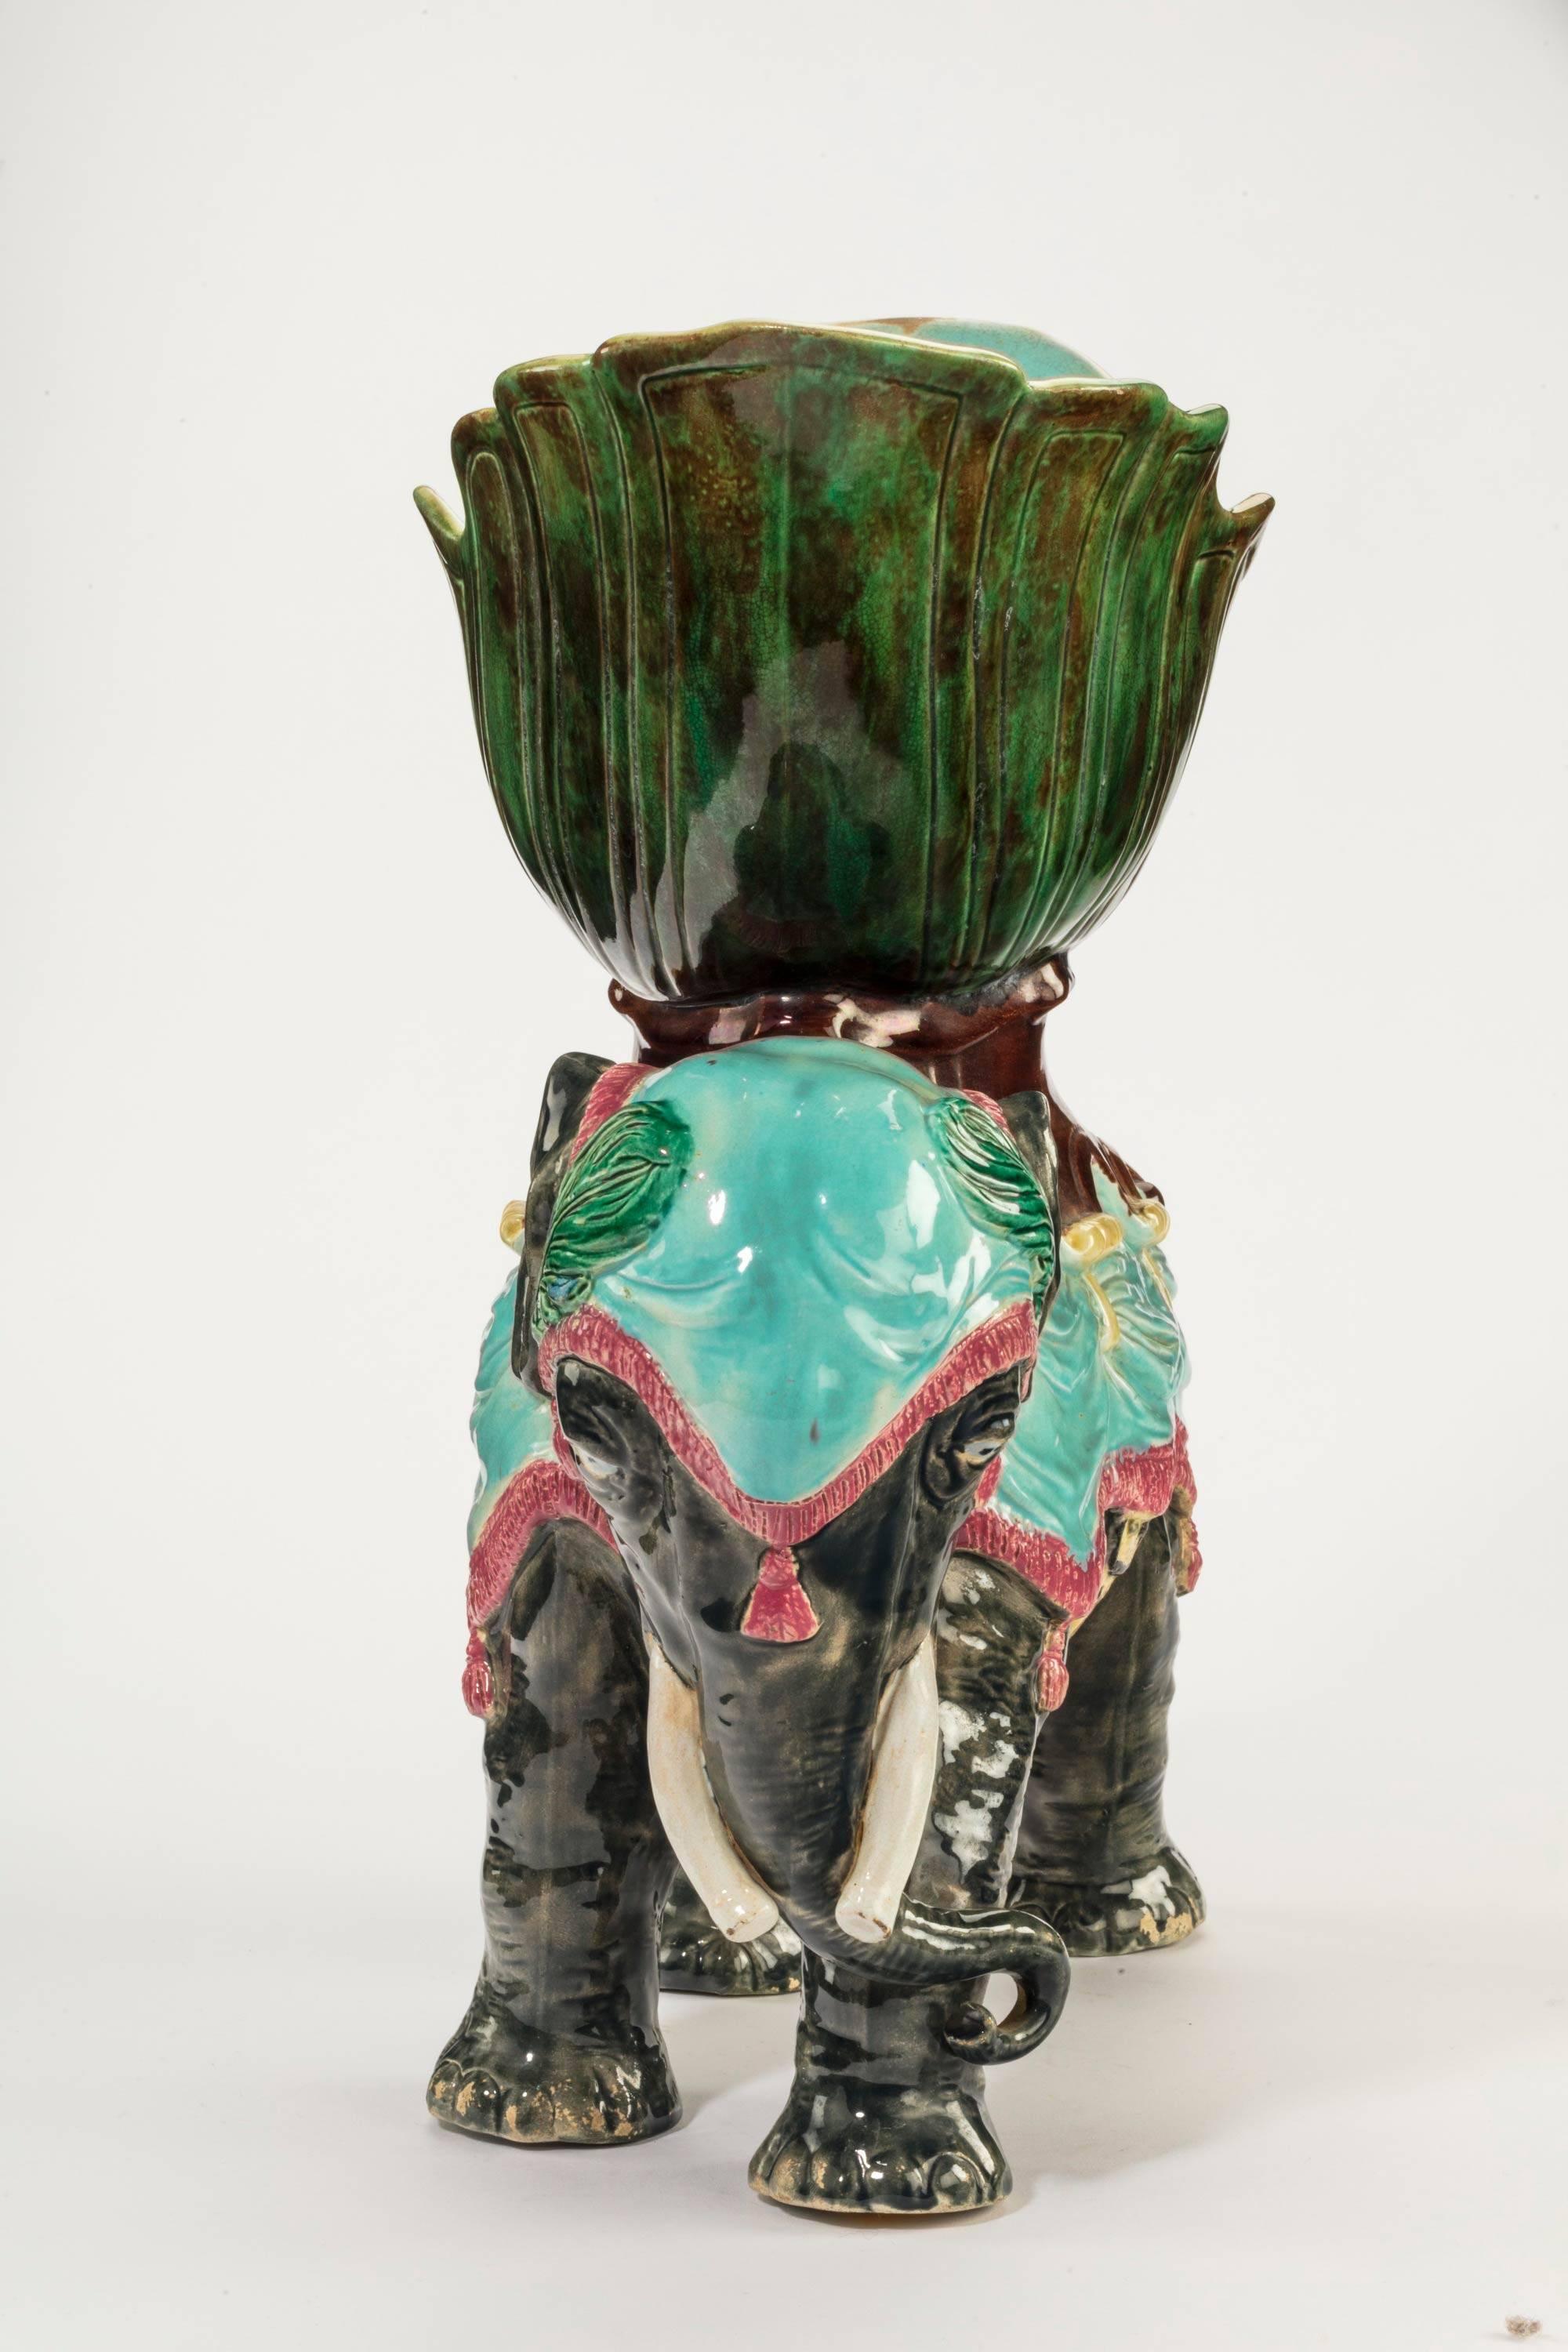 An unusual Majolica pottery elephant caparisoned with jardinière. Excellent overall condition.